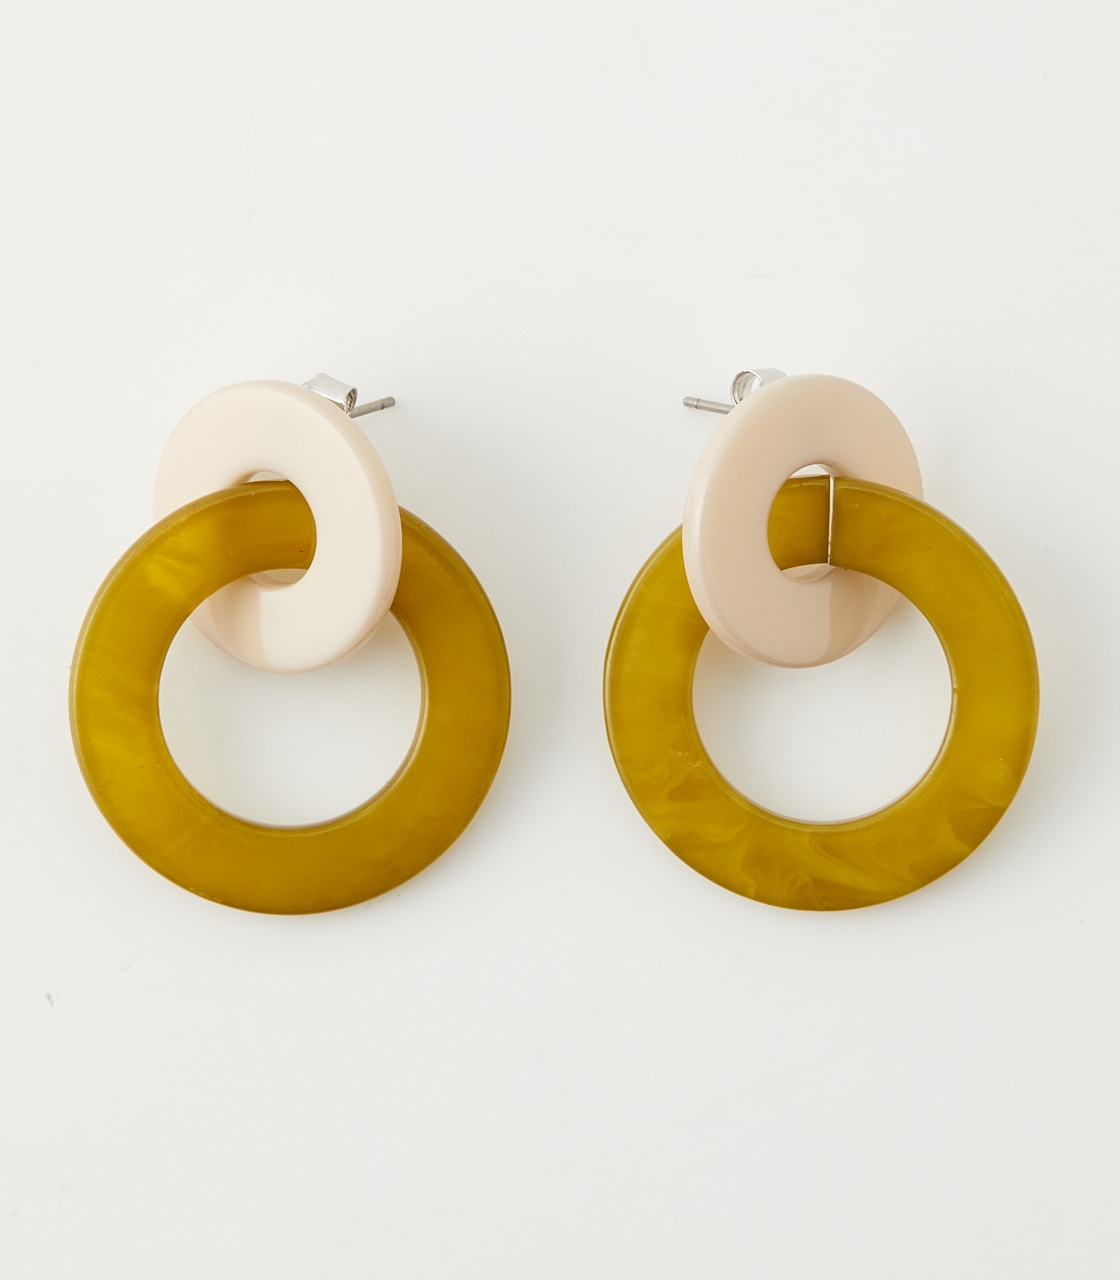 COLOR CONTRAST ROUND EARRINGS/カラーコントラストラウンドピアス【MOOK54掲載 90352】 詳細画像 柄YEL 1